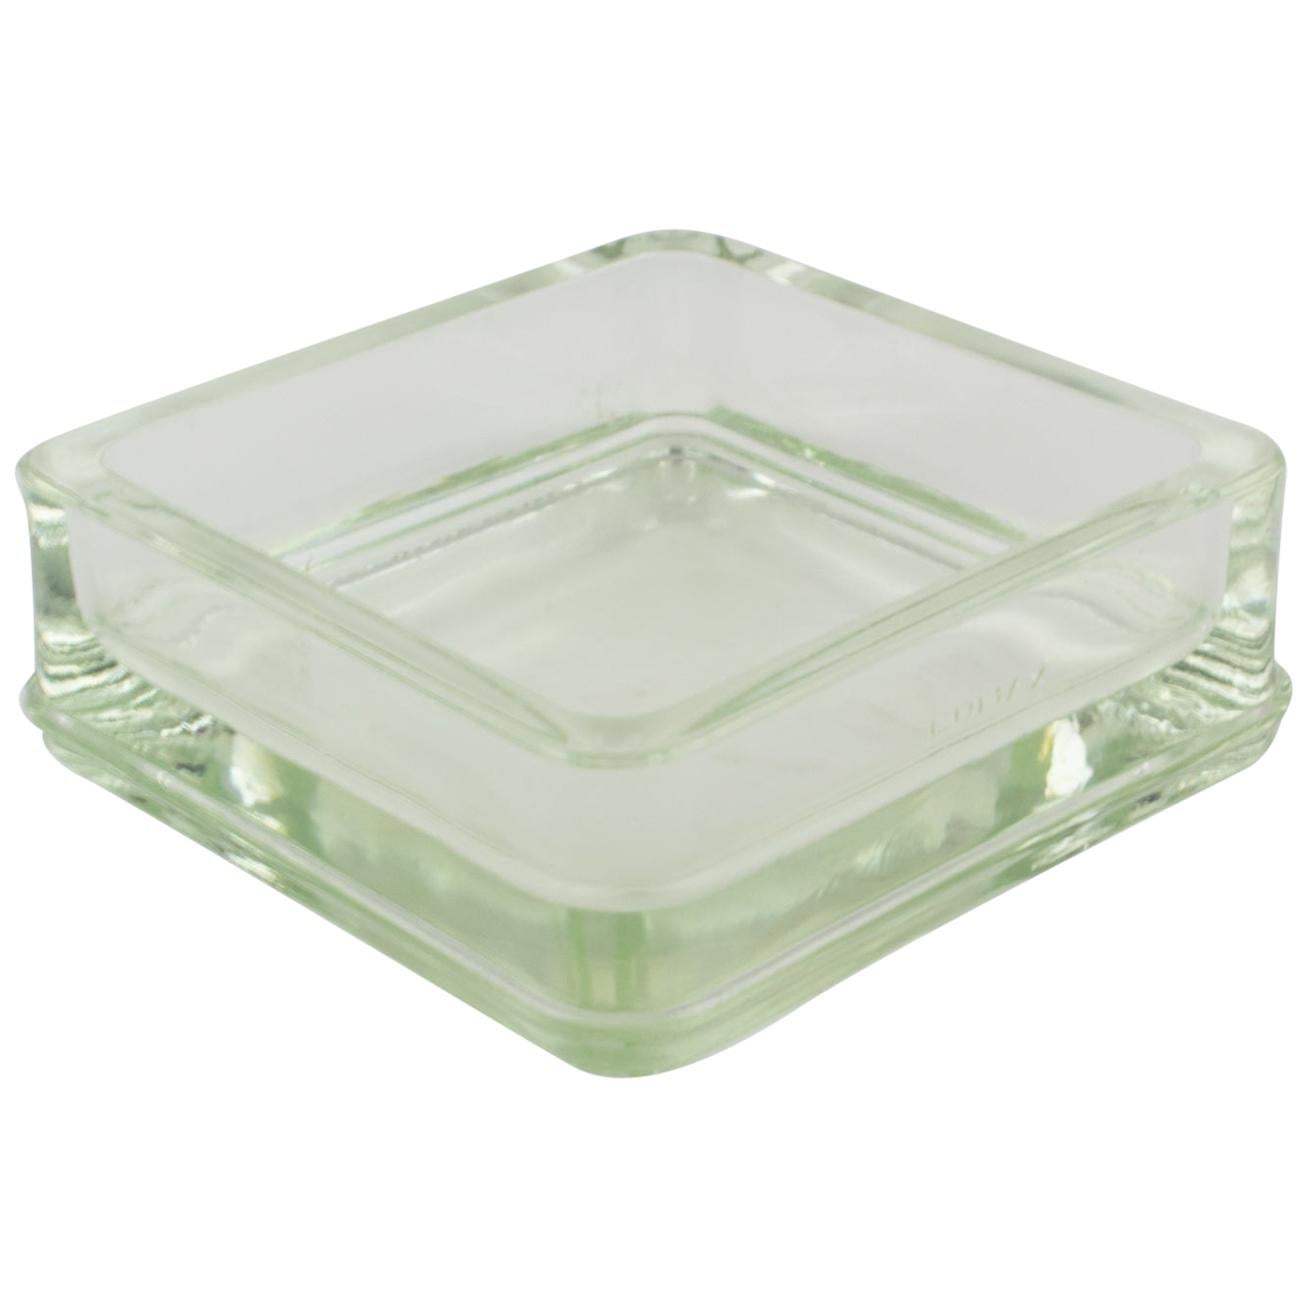 Le Corbusier for Lumax Molded Glass Ashtray Catchall